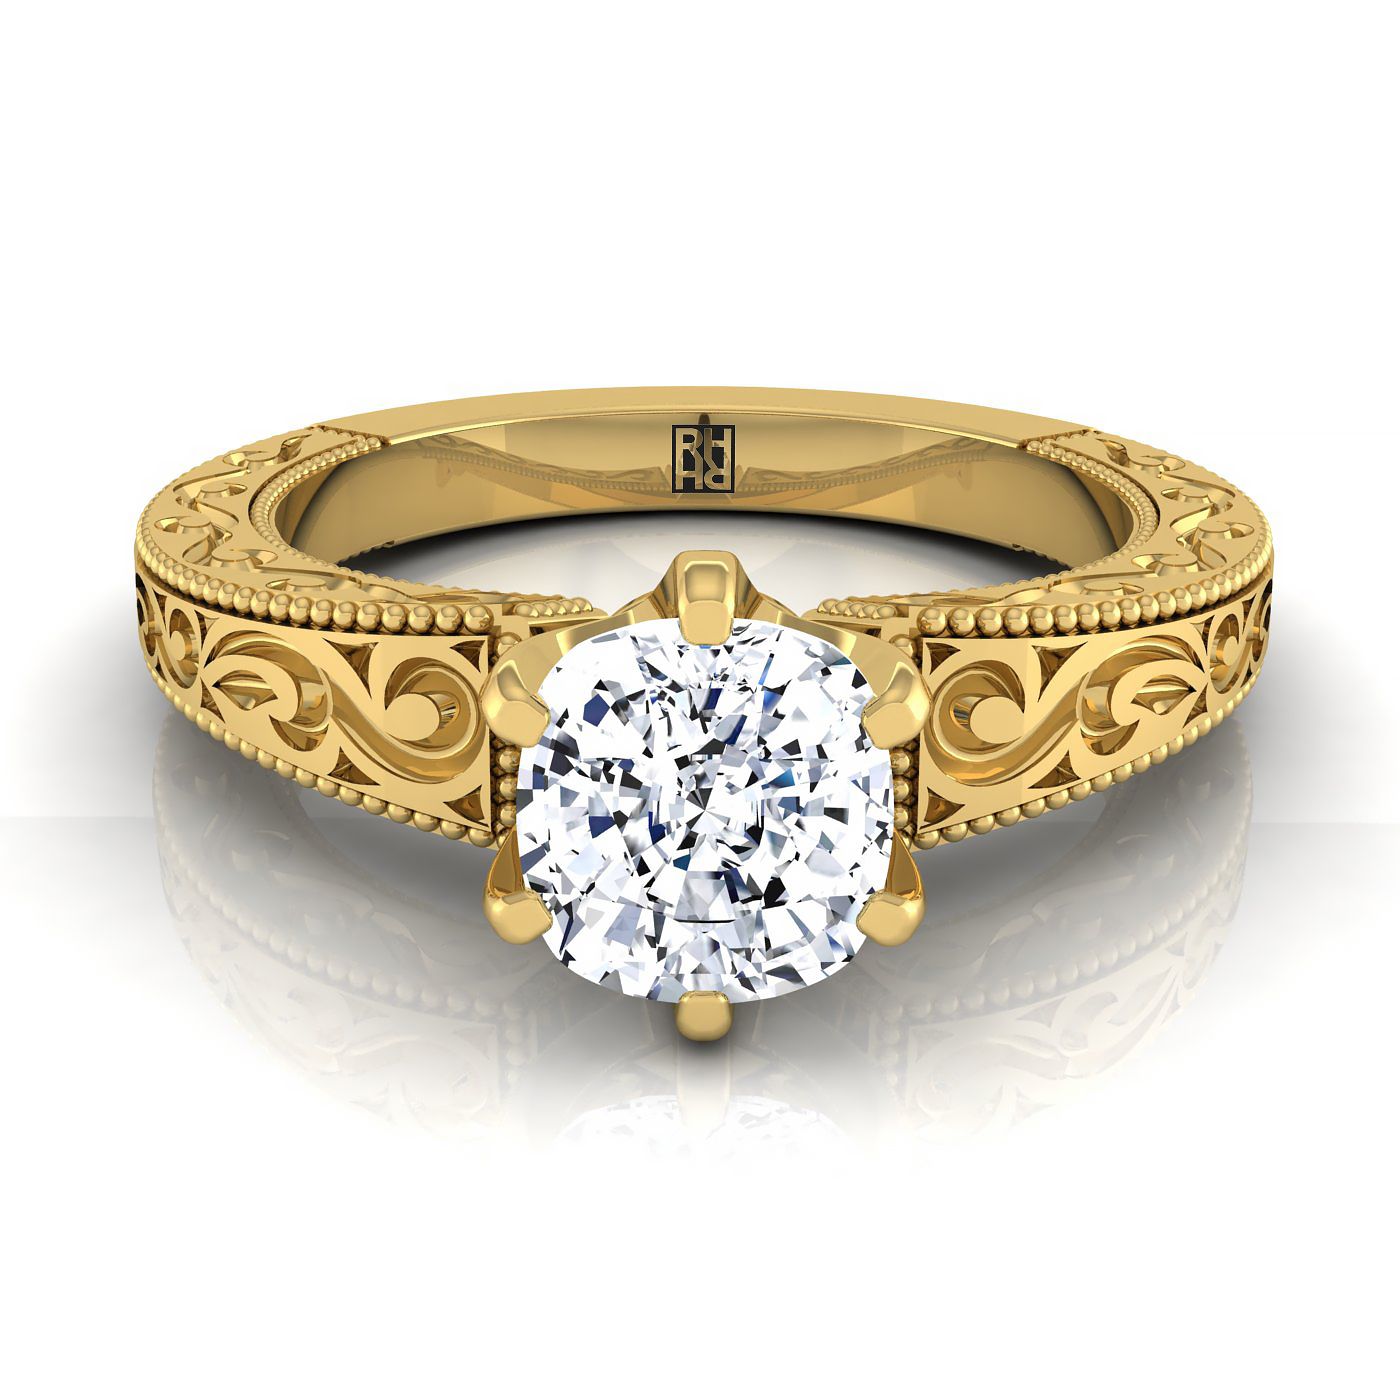 18K Yellow Gold Cushion Hand Engraved Scroll Vintage Solitaire Engagement Ring